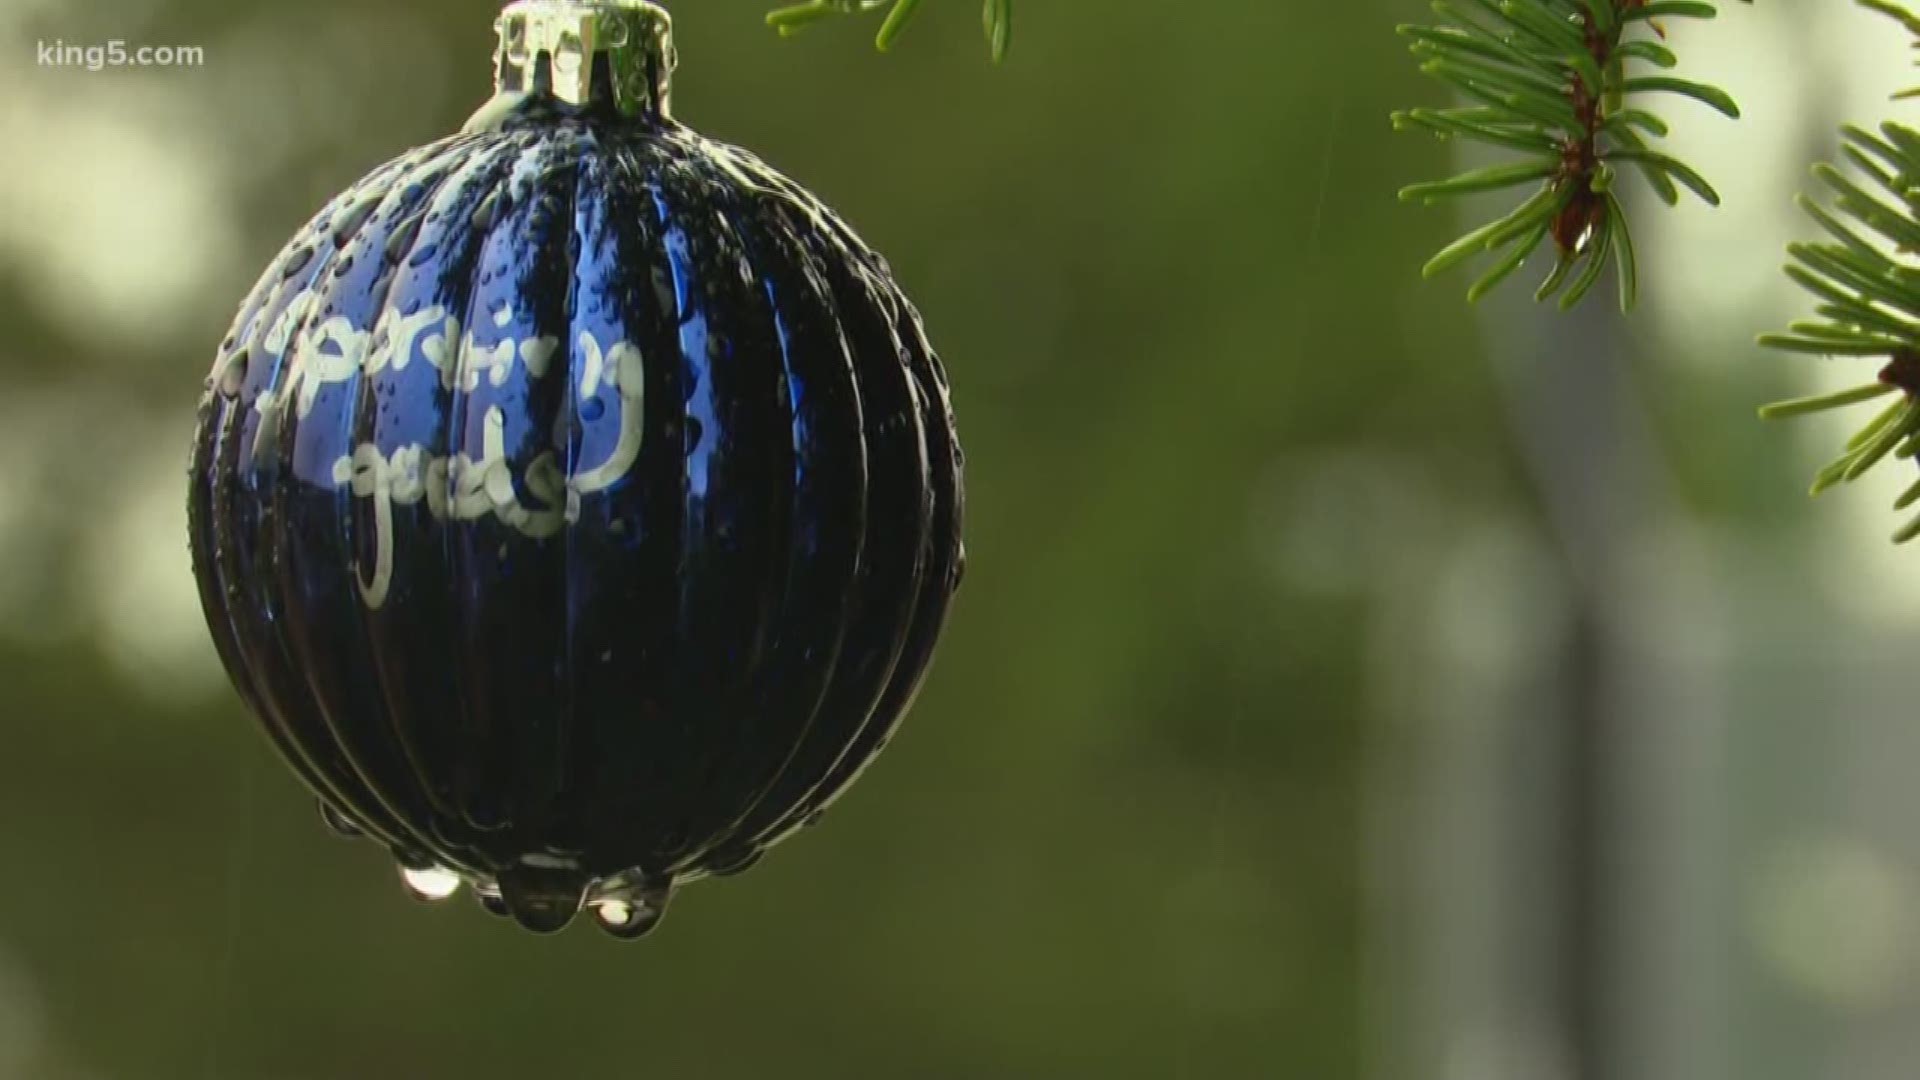 Two Maple Valley women have launched a project to make sure fallen officers aren’t forgotten during the holiday season.